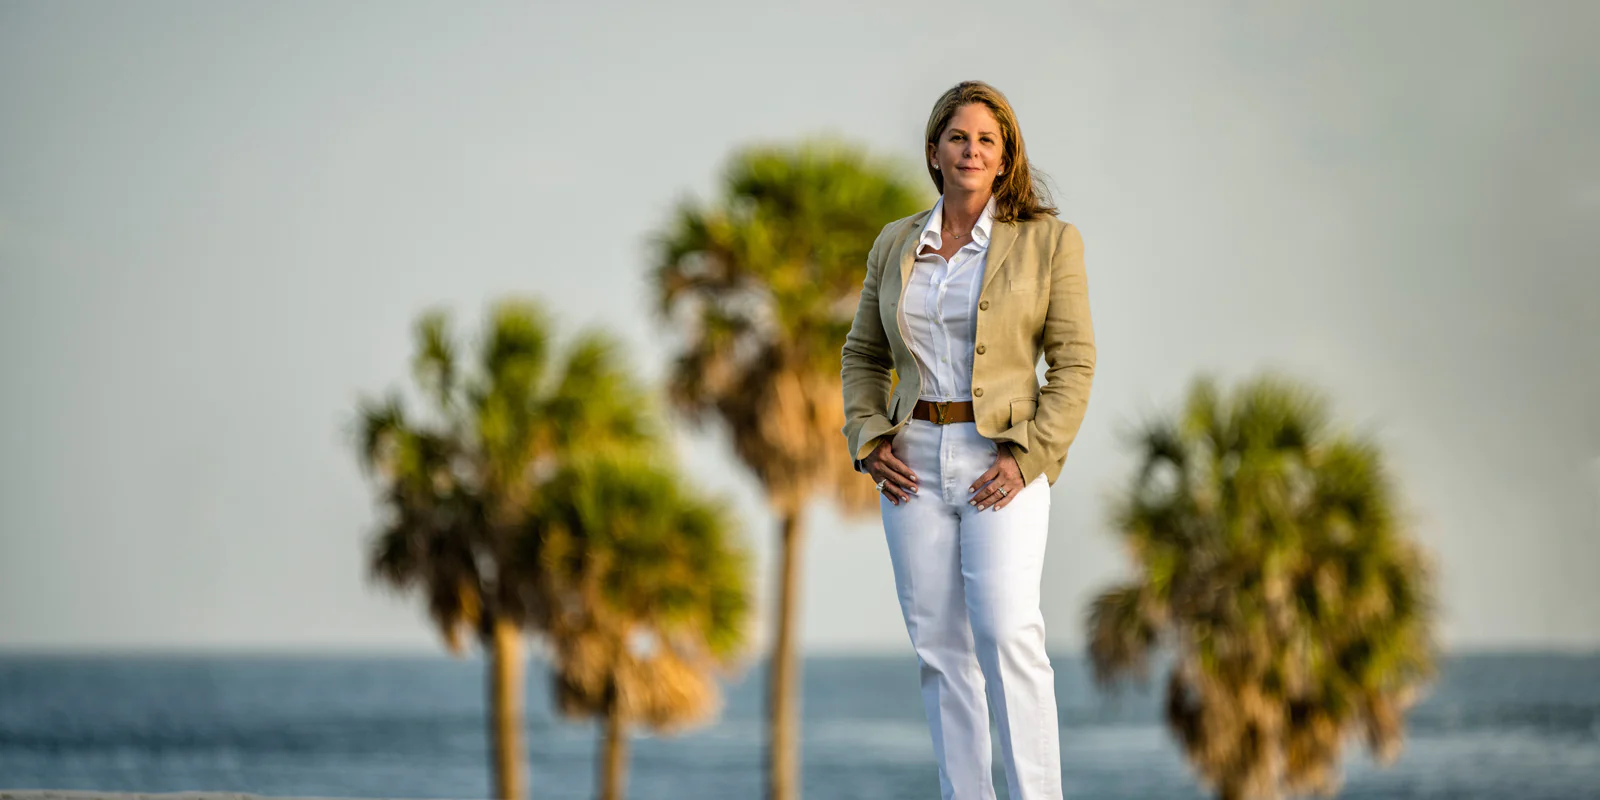 jackie joseph standing in a beige suit, with palm tree backgrounds